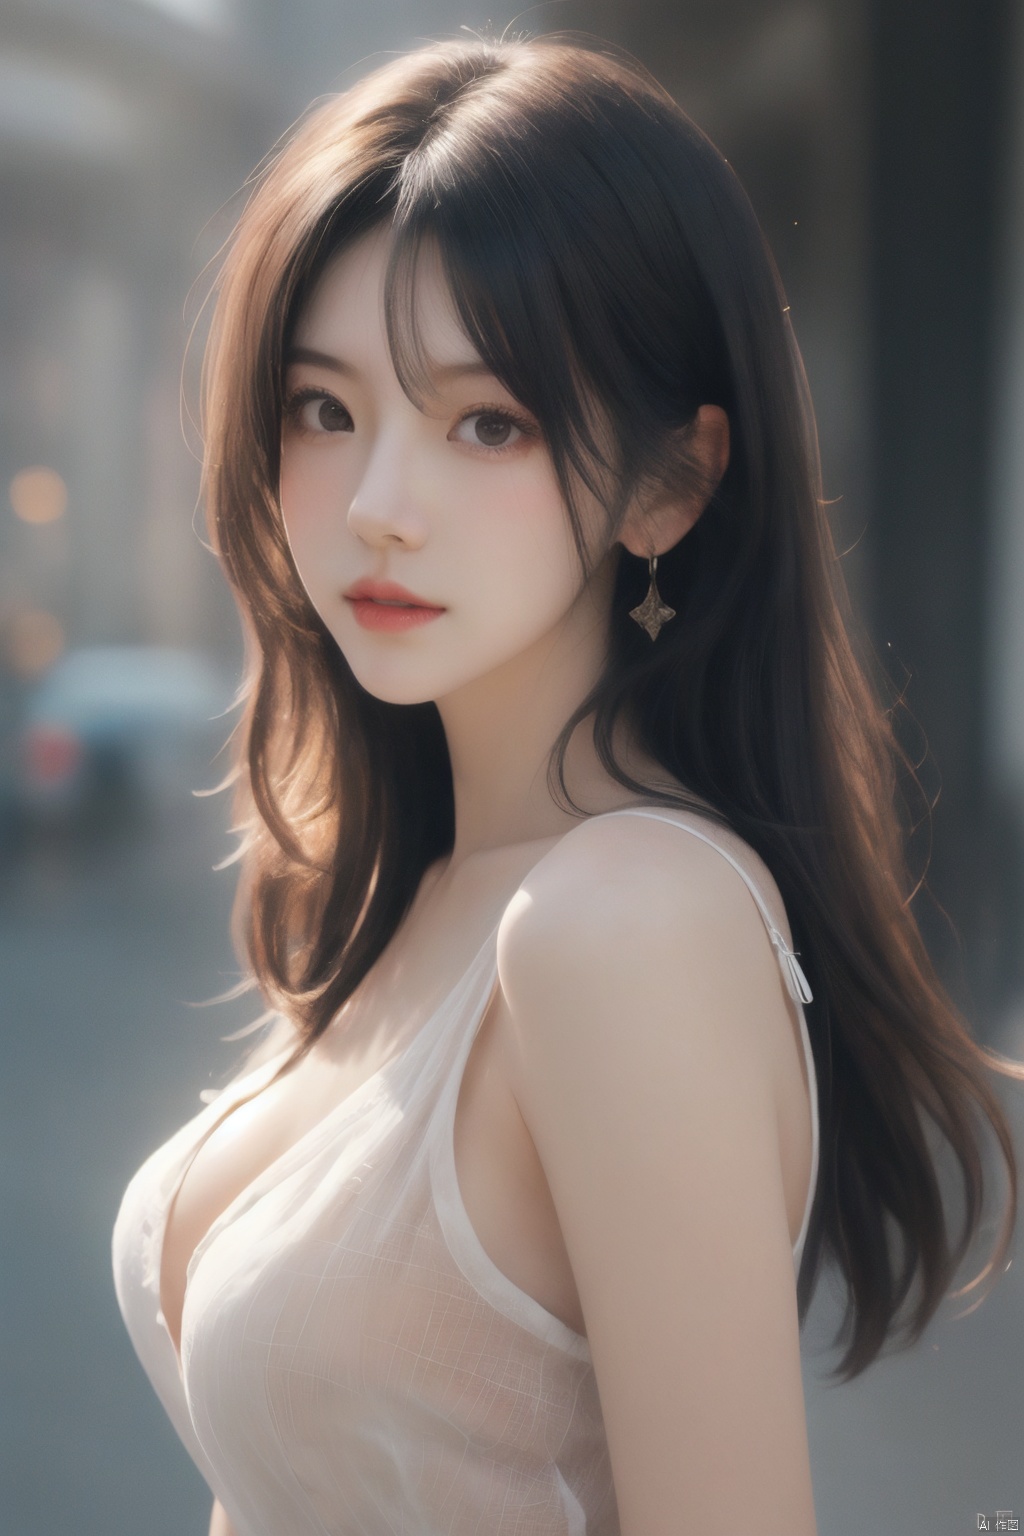  1girl,1girl,looking at viewer,RAW photo,photorealistic:1.37,realistic,highly detailed CG unified 8K wallpapers,thick body:1.1,straight from front,HQ skin:1.8,shiny skin,8k uhd,Fujifilm XT3,professional lighting:1.6,Immaculate skin,jujingyi,Cowboy lens,Upper body,soft lighting,film grain,high quality,white dress,bra,big boobs,white_skin,film sense,grainy,, pld